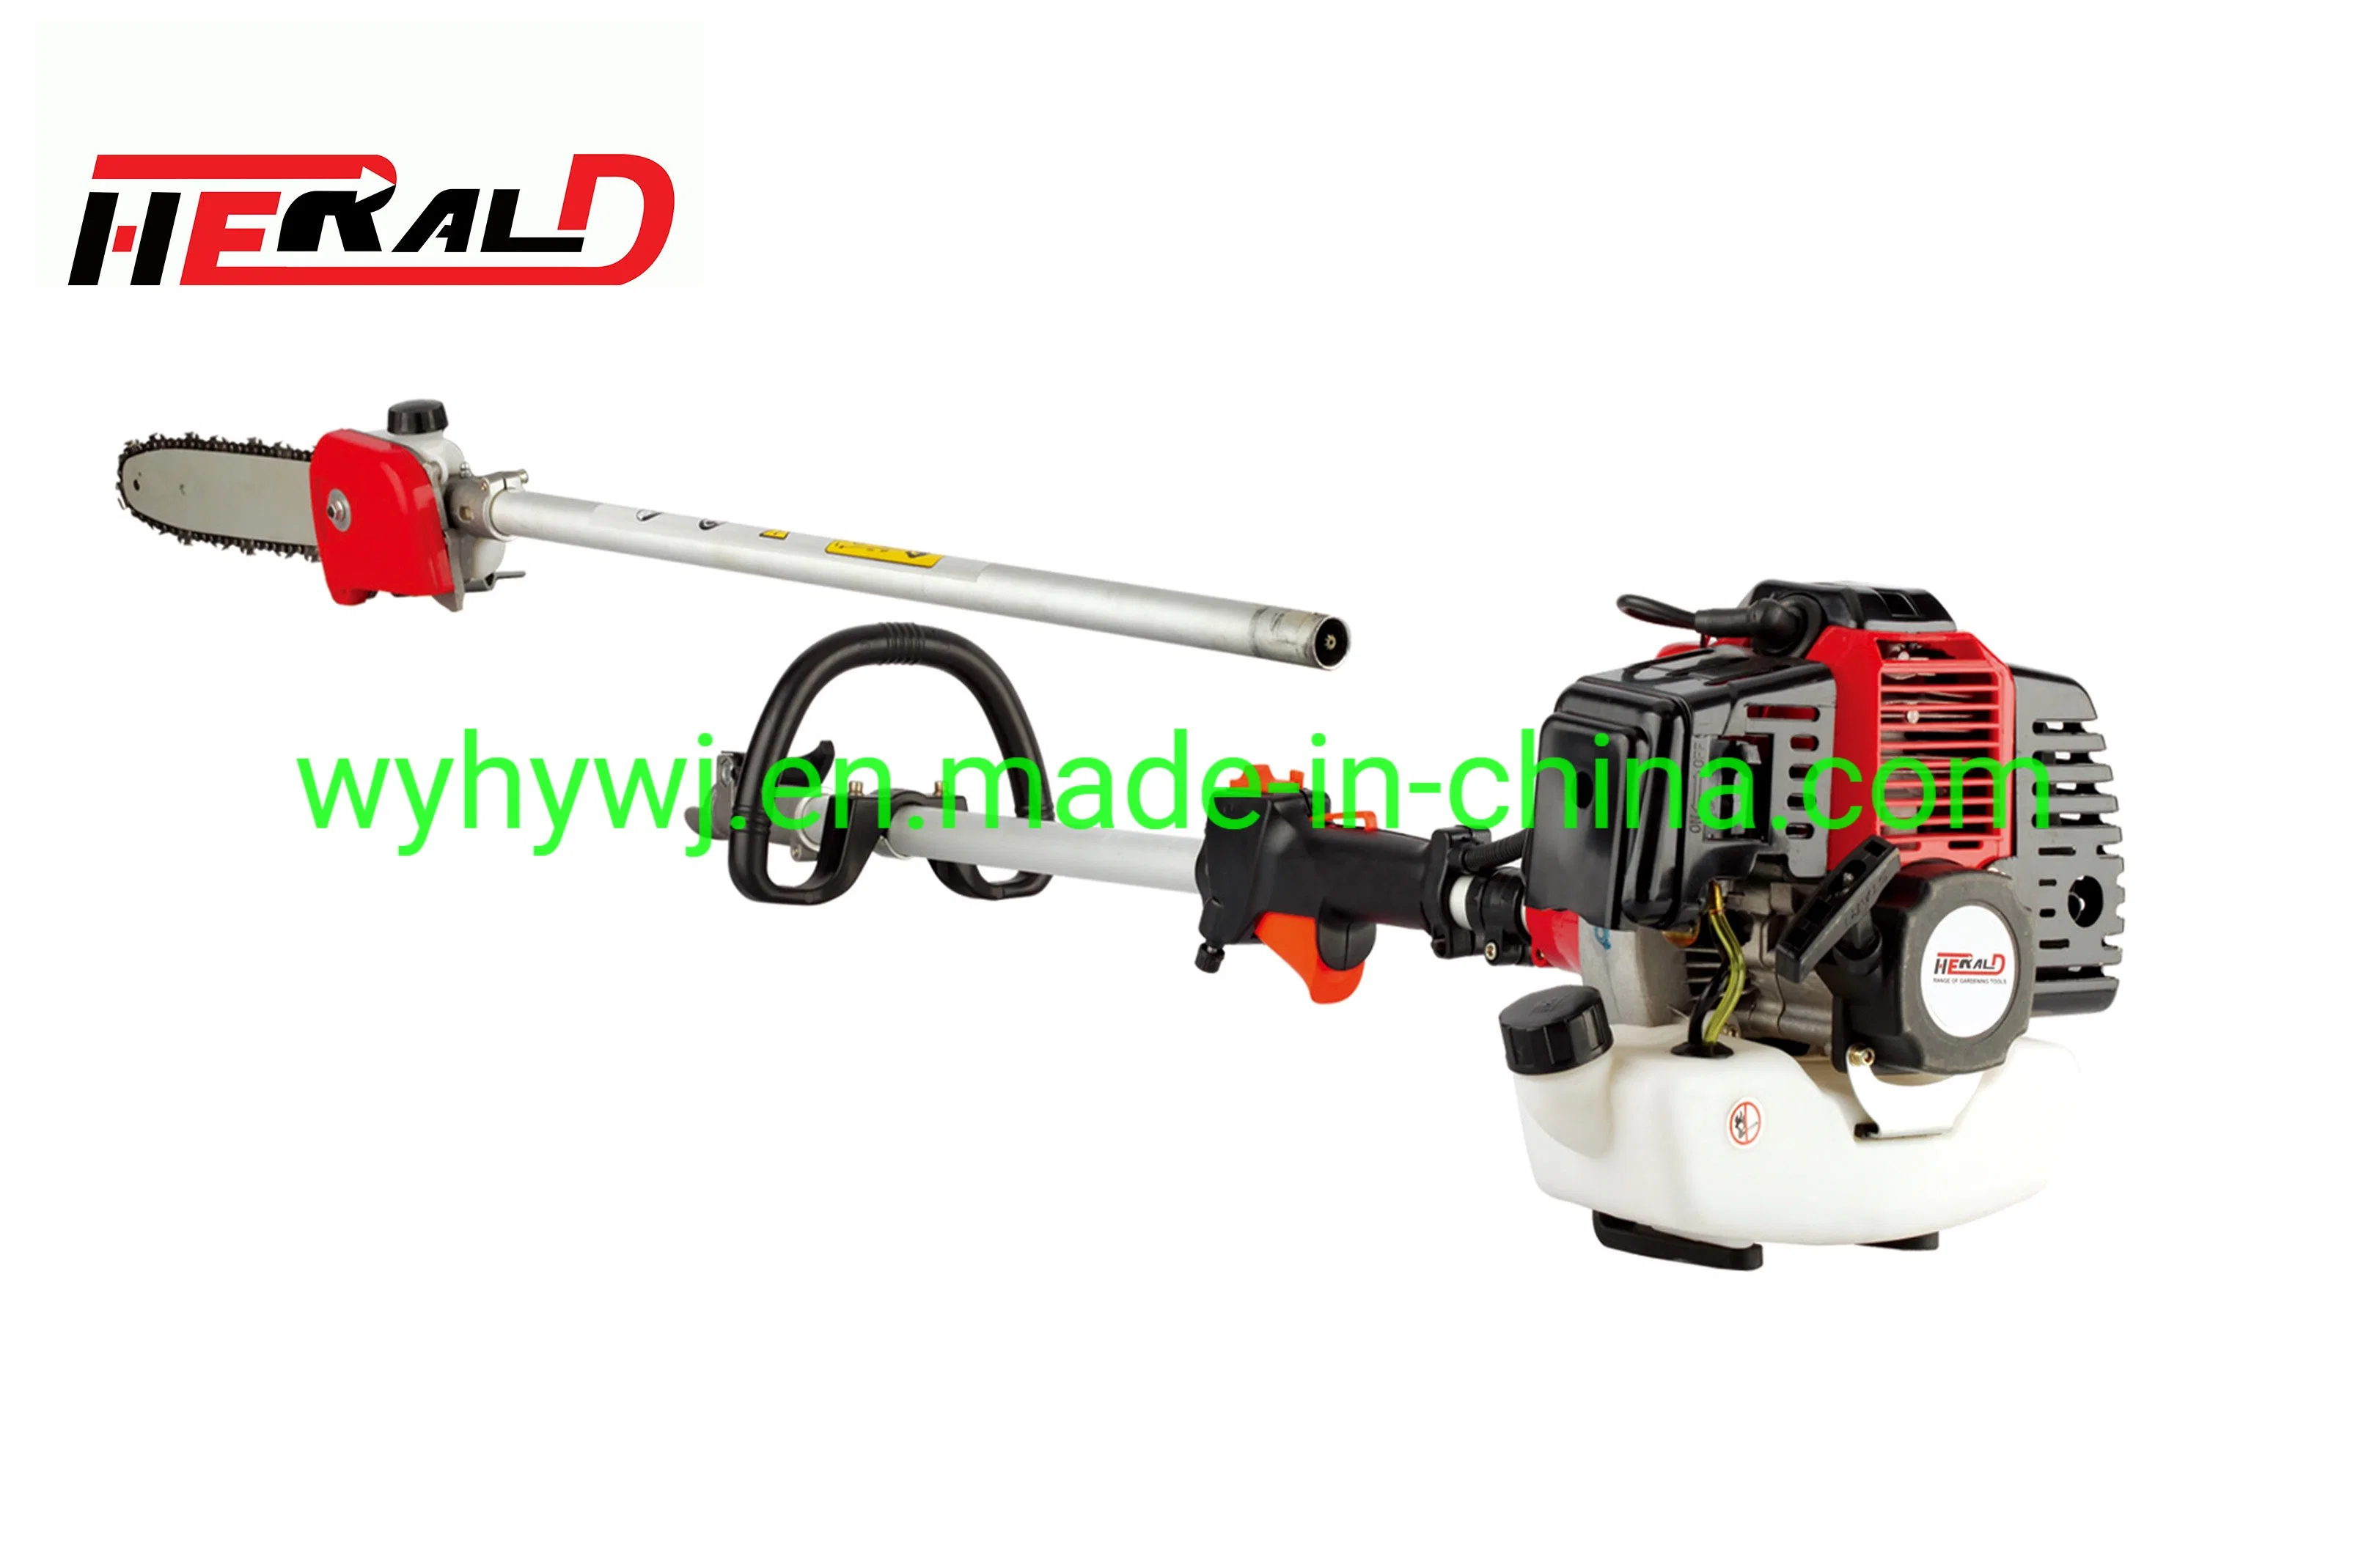 Professional 2 Stroke Good Quality 4 in 1 Multifunction Gasoline Brush Cutter Hy-325 Cut The Grass Easily Garden Tool